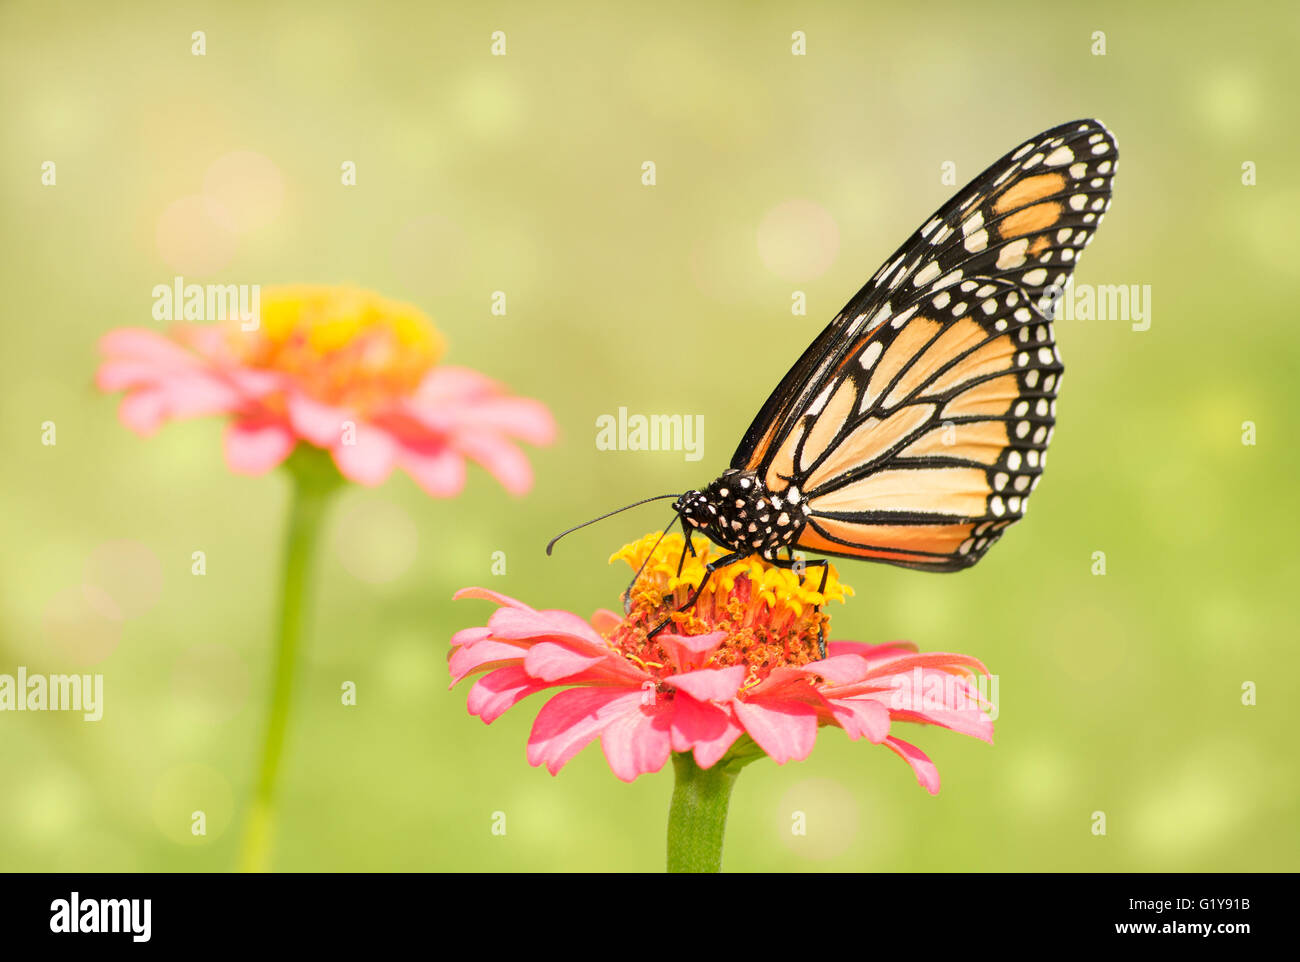 Dreamy image of a Monarch butterfly on light pink Zinnia flower in sunny summer garden Stock Photo